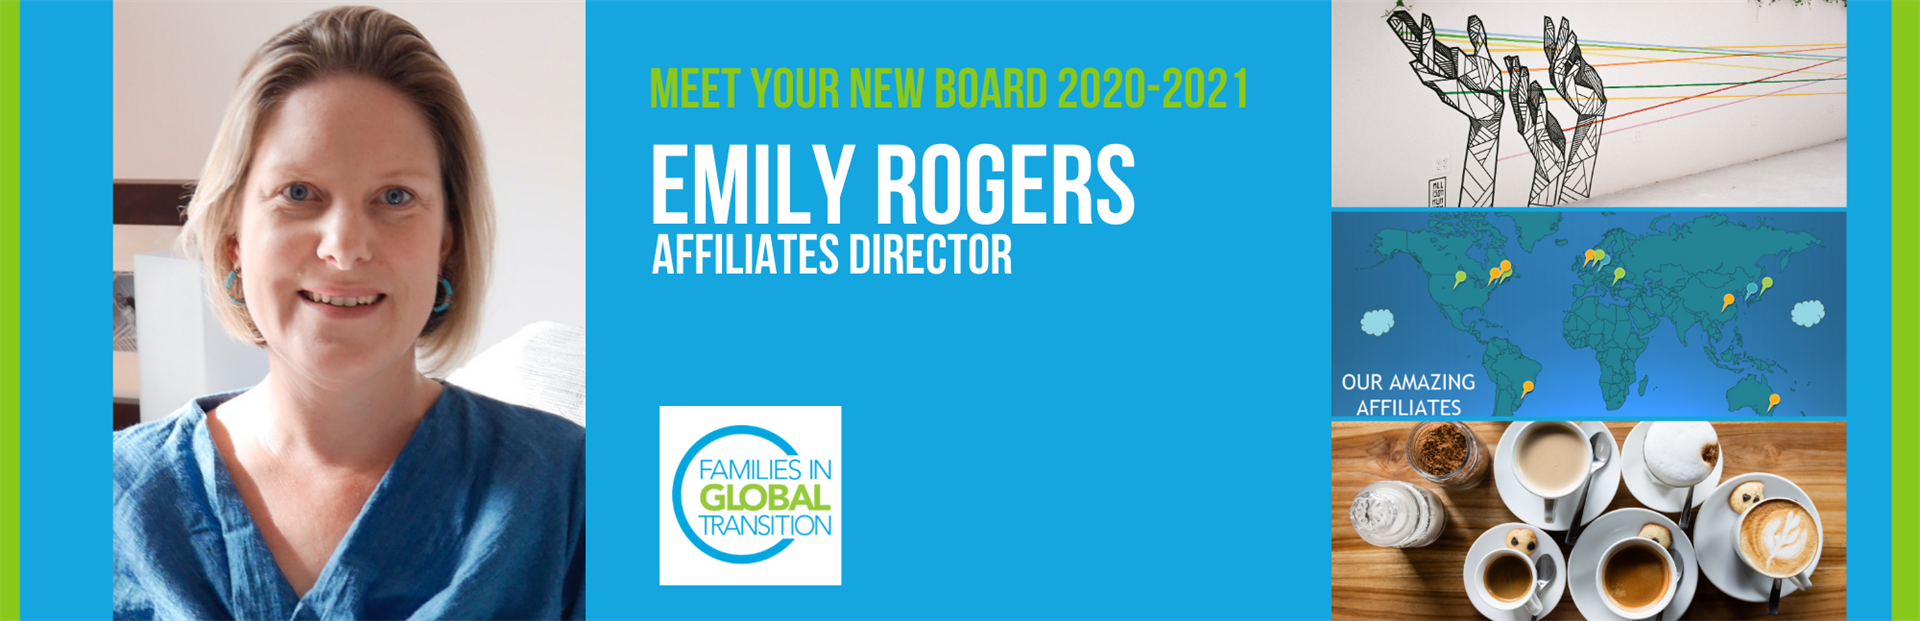 blog title: meet your new board 2020-2021 Emily Rogers, Affiliates Director